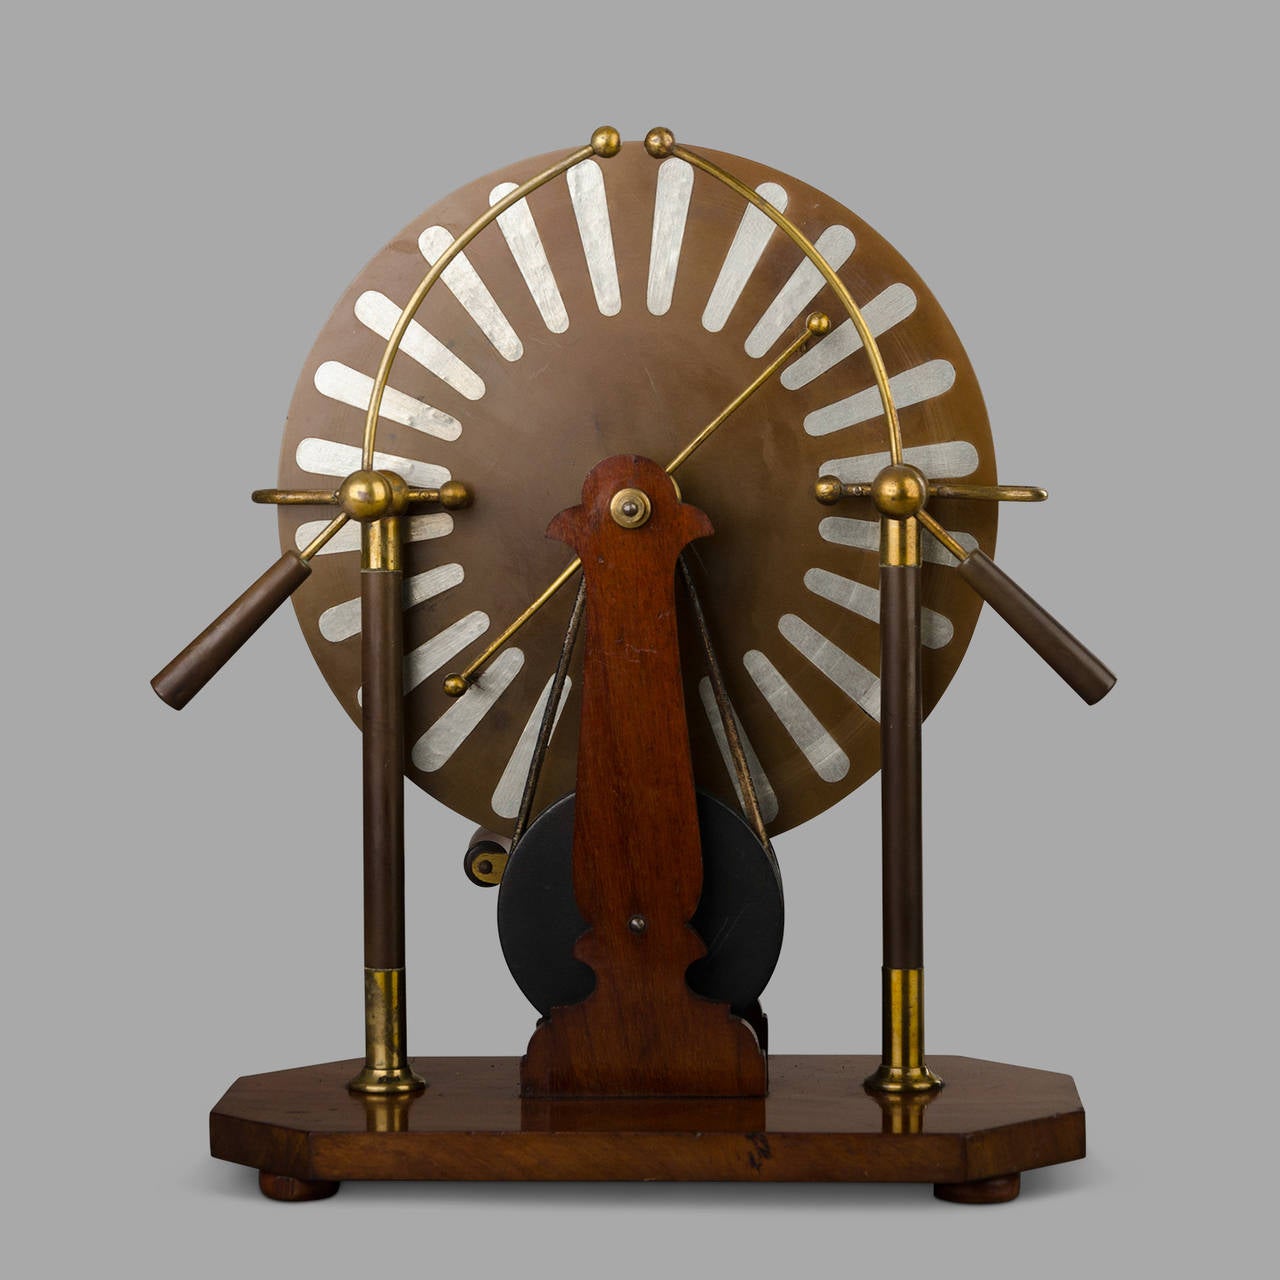 Mahogany model with brass elements.

The Wimshurst machine is an electrostatic device invented in 1882 by Englishman James Wimshurst.
This machine was historically used to illustrate many static phenomena or ozone production in an electric arc.